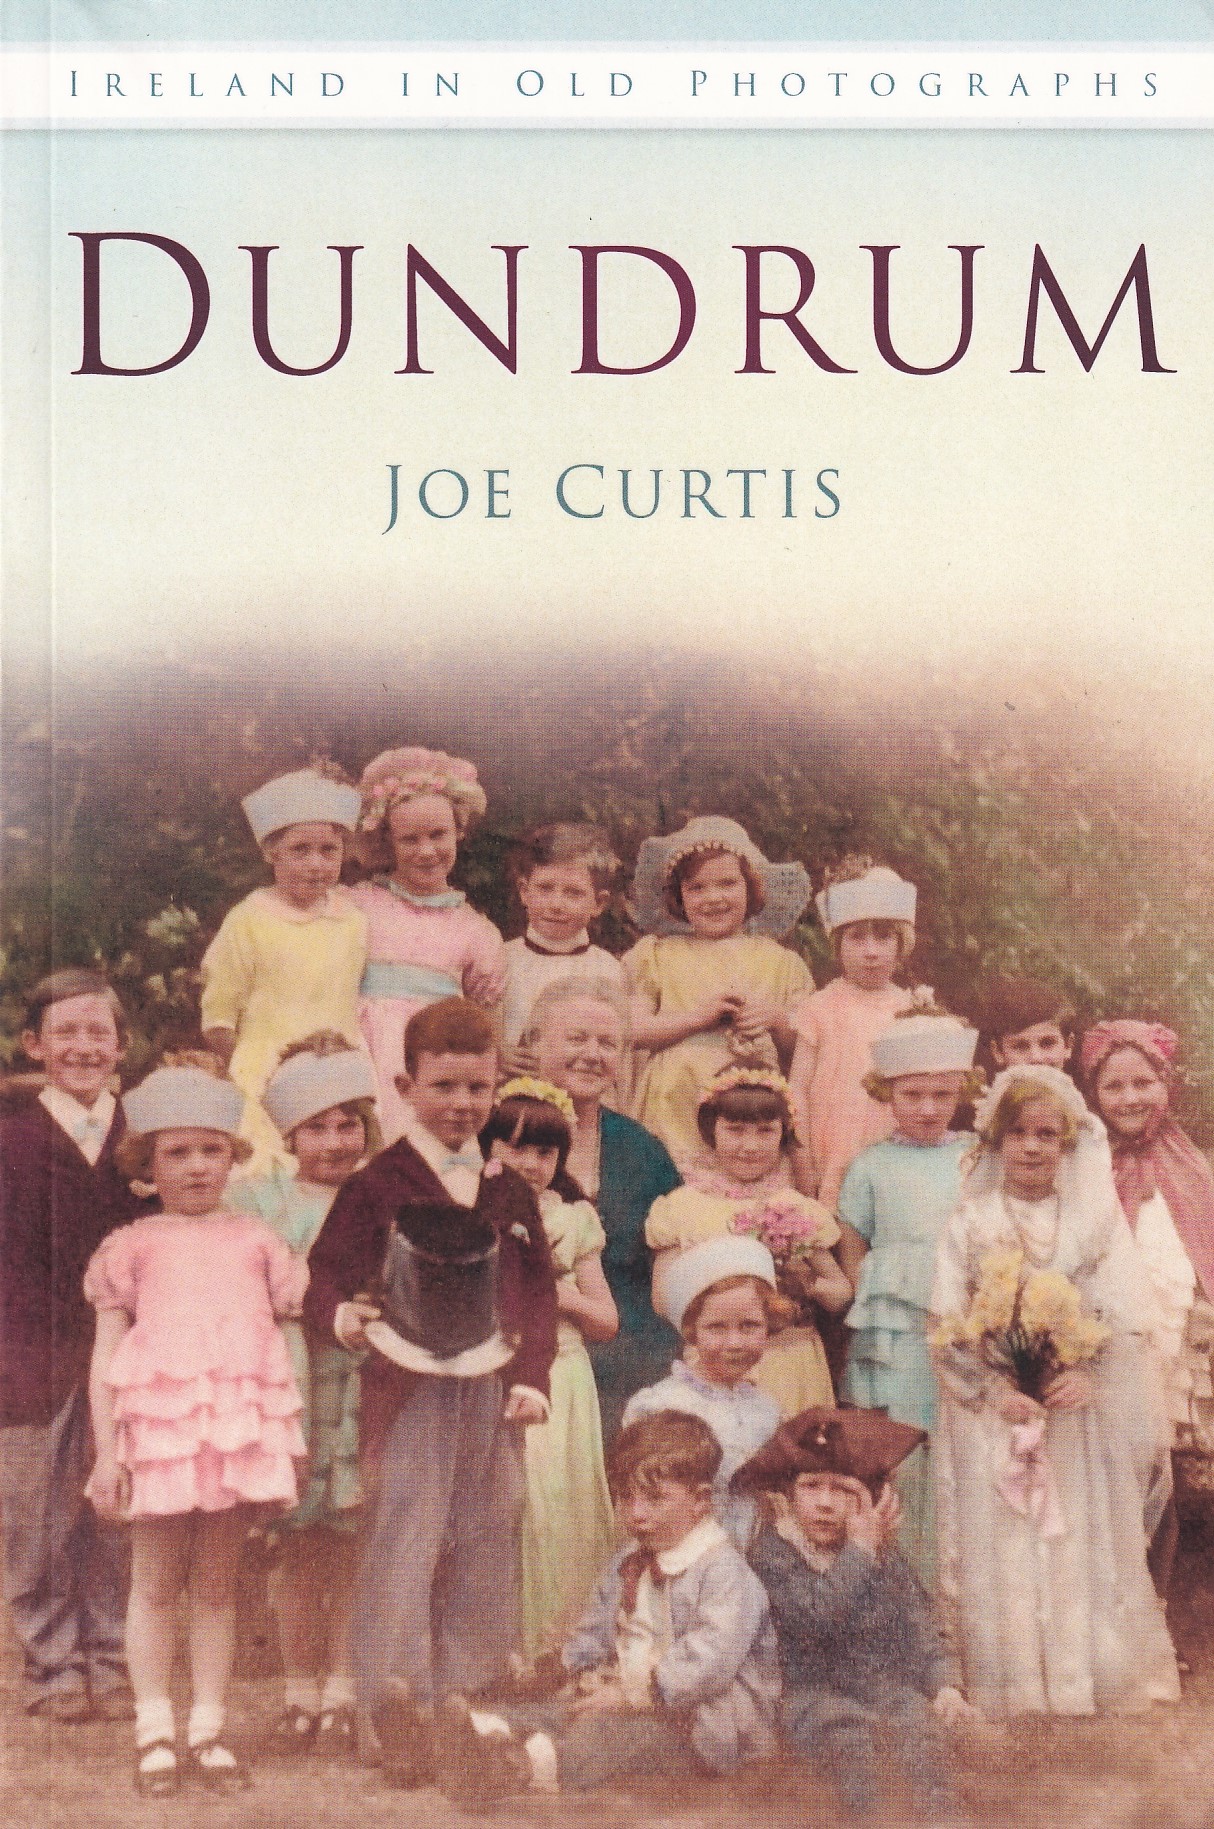 Dundrum: Ireland in Old Photographs | Joe Curtis | Charlie Byrne's